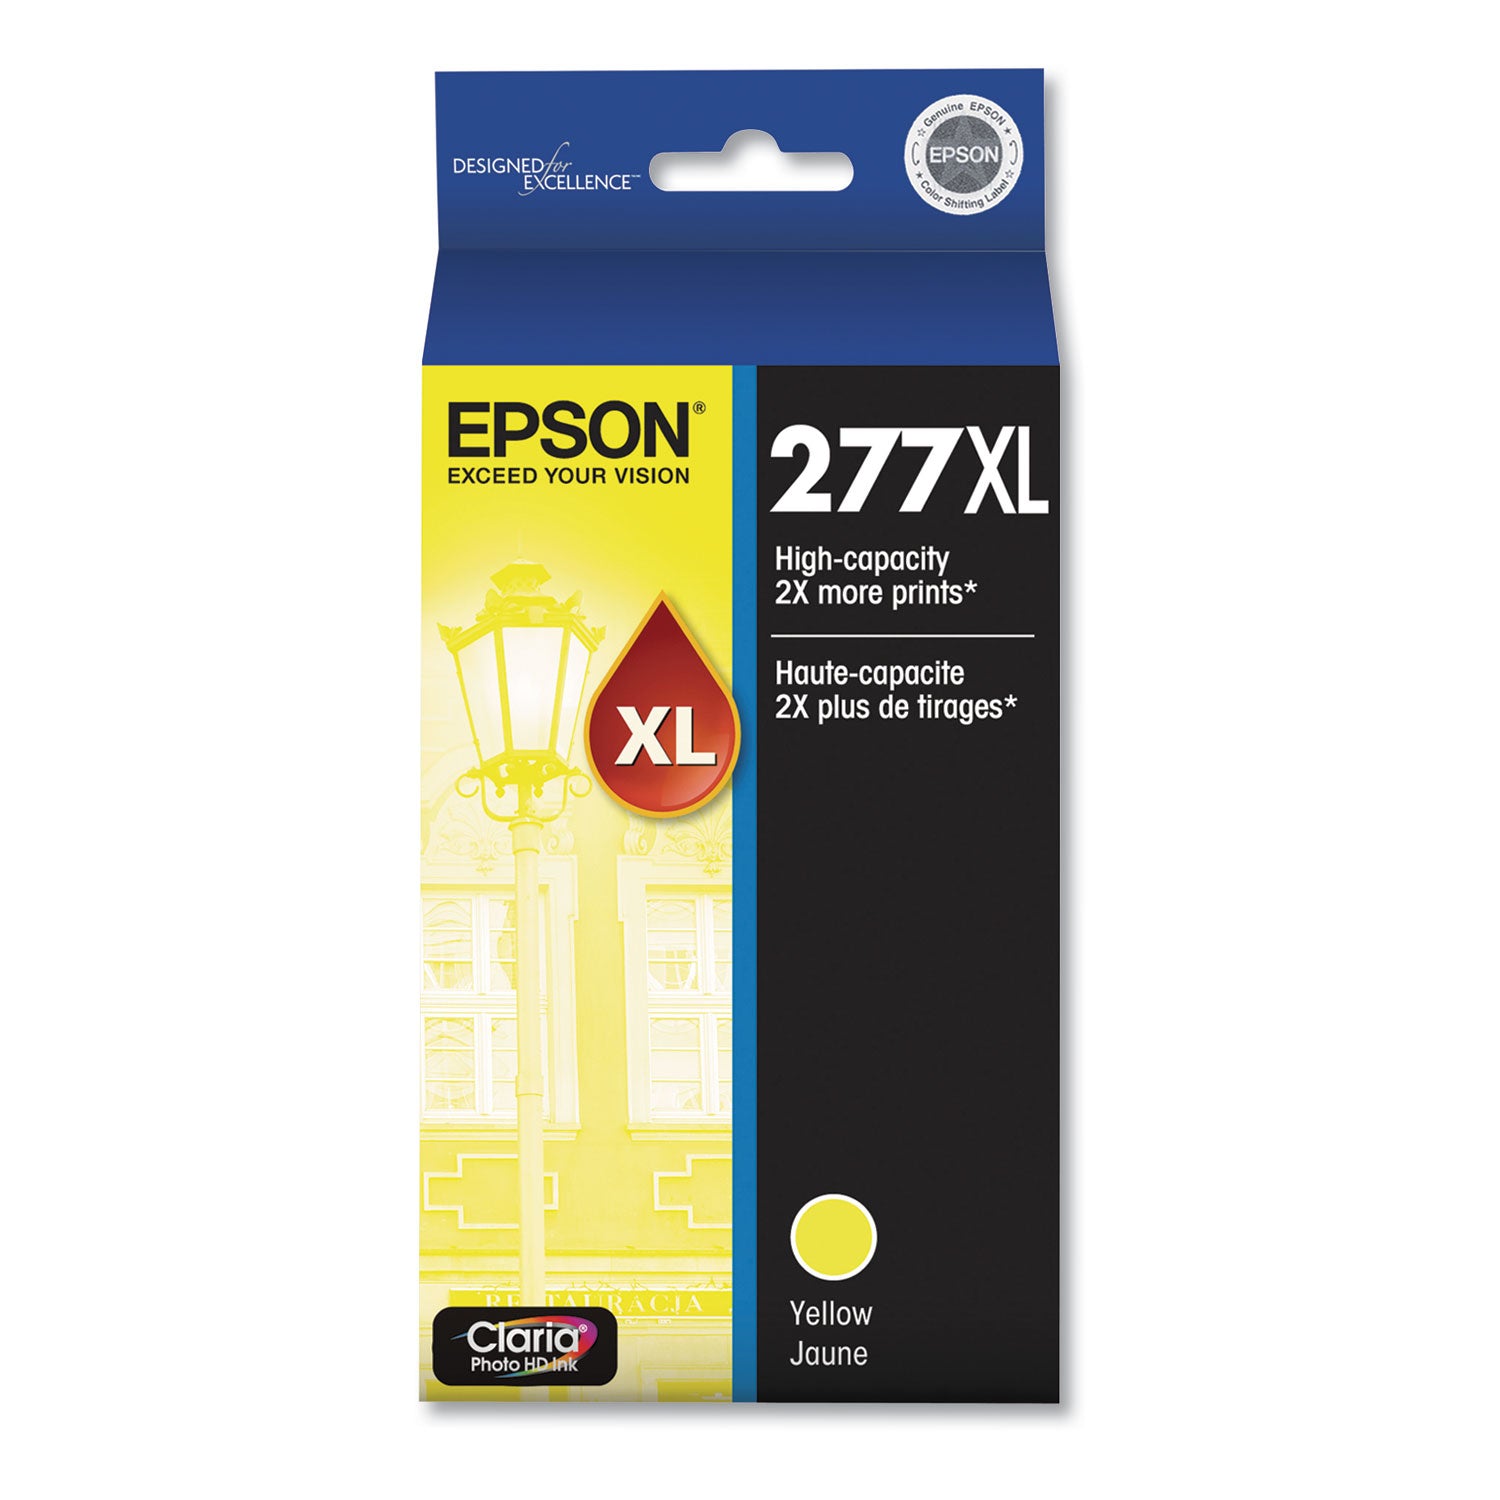 t277xl420-s-277xl-claria-high-yield-ink-740-page-yield-yellow_epst277xl420s - 1